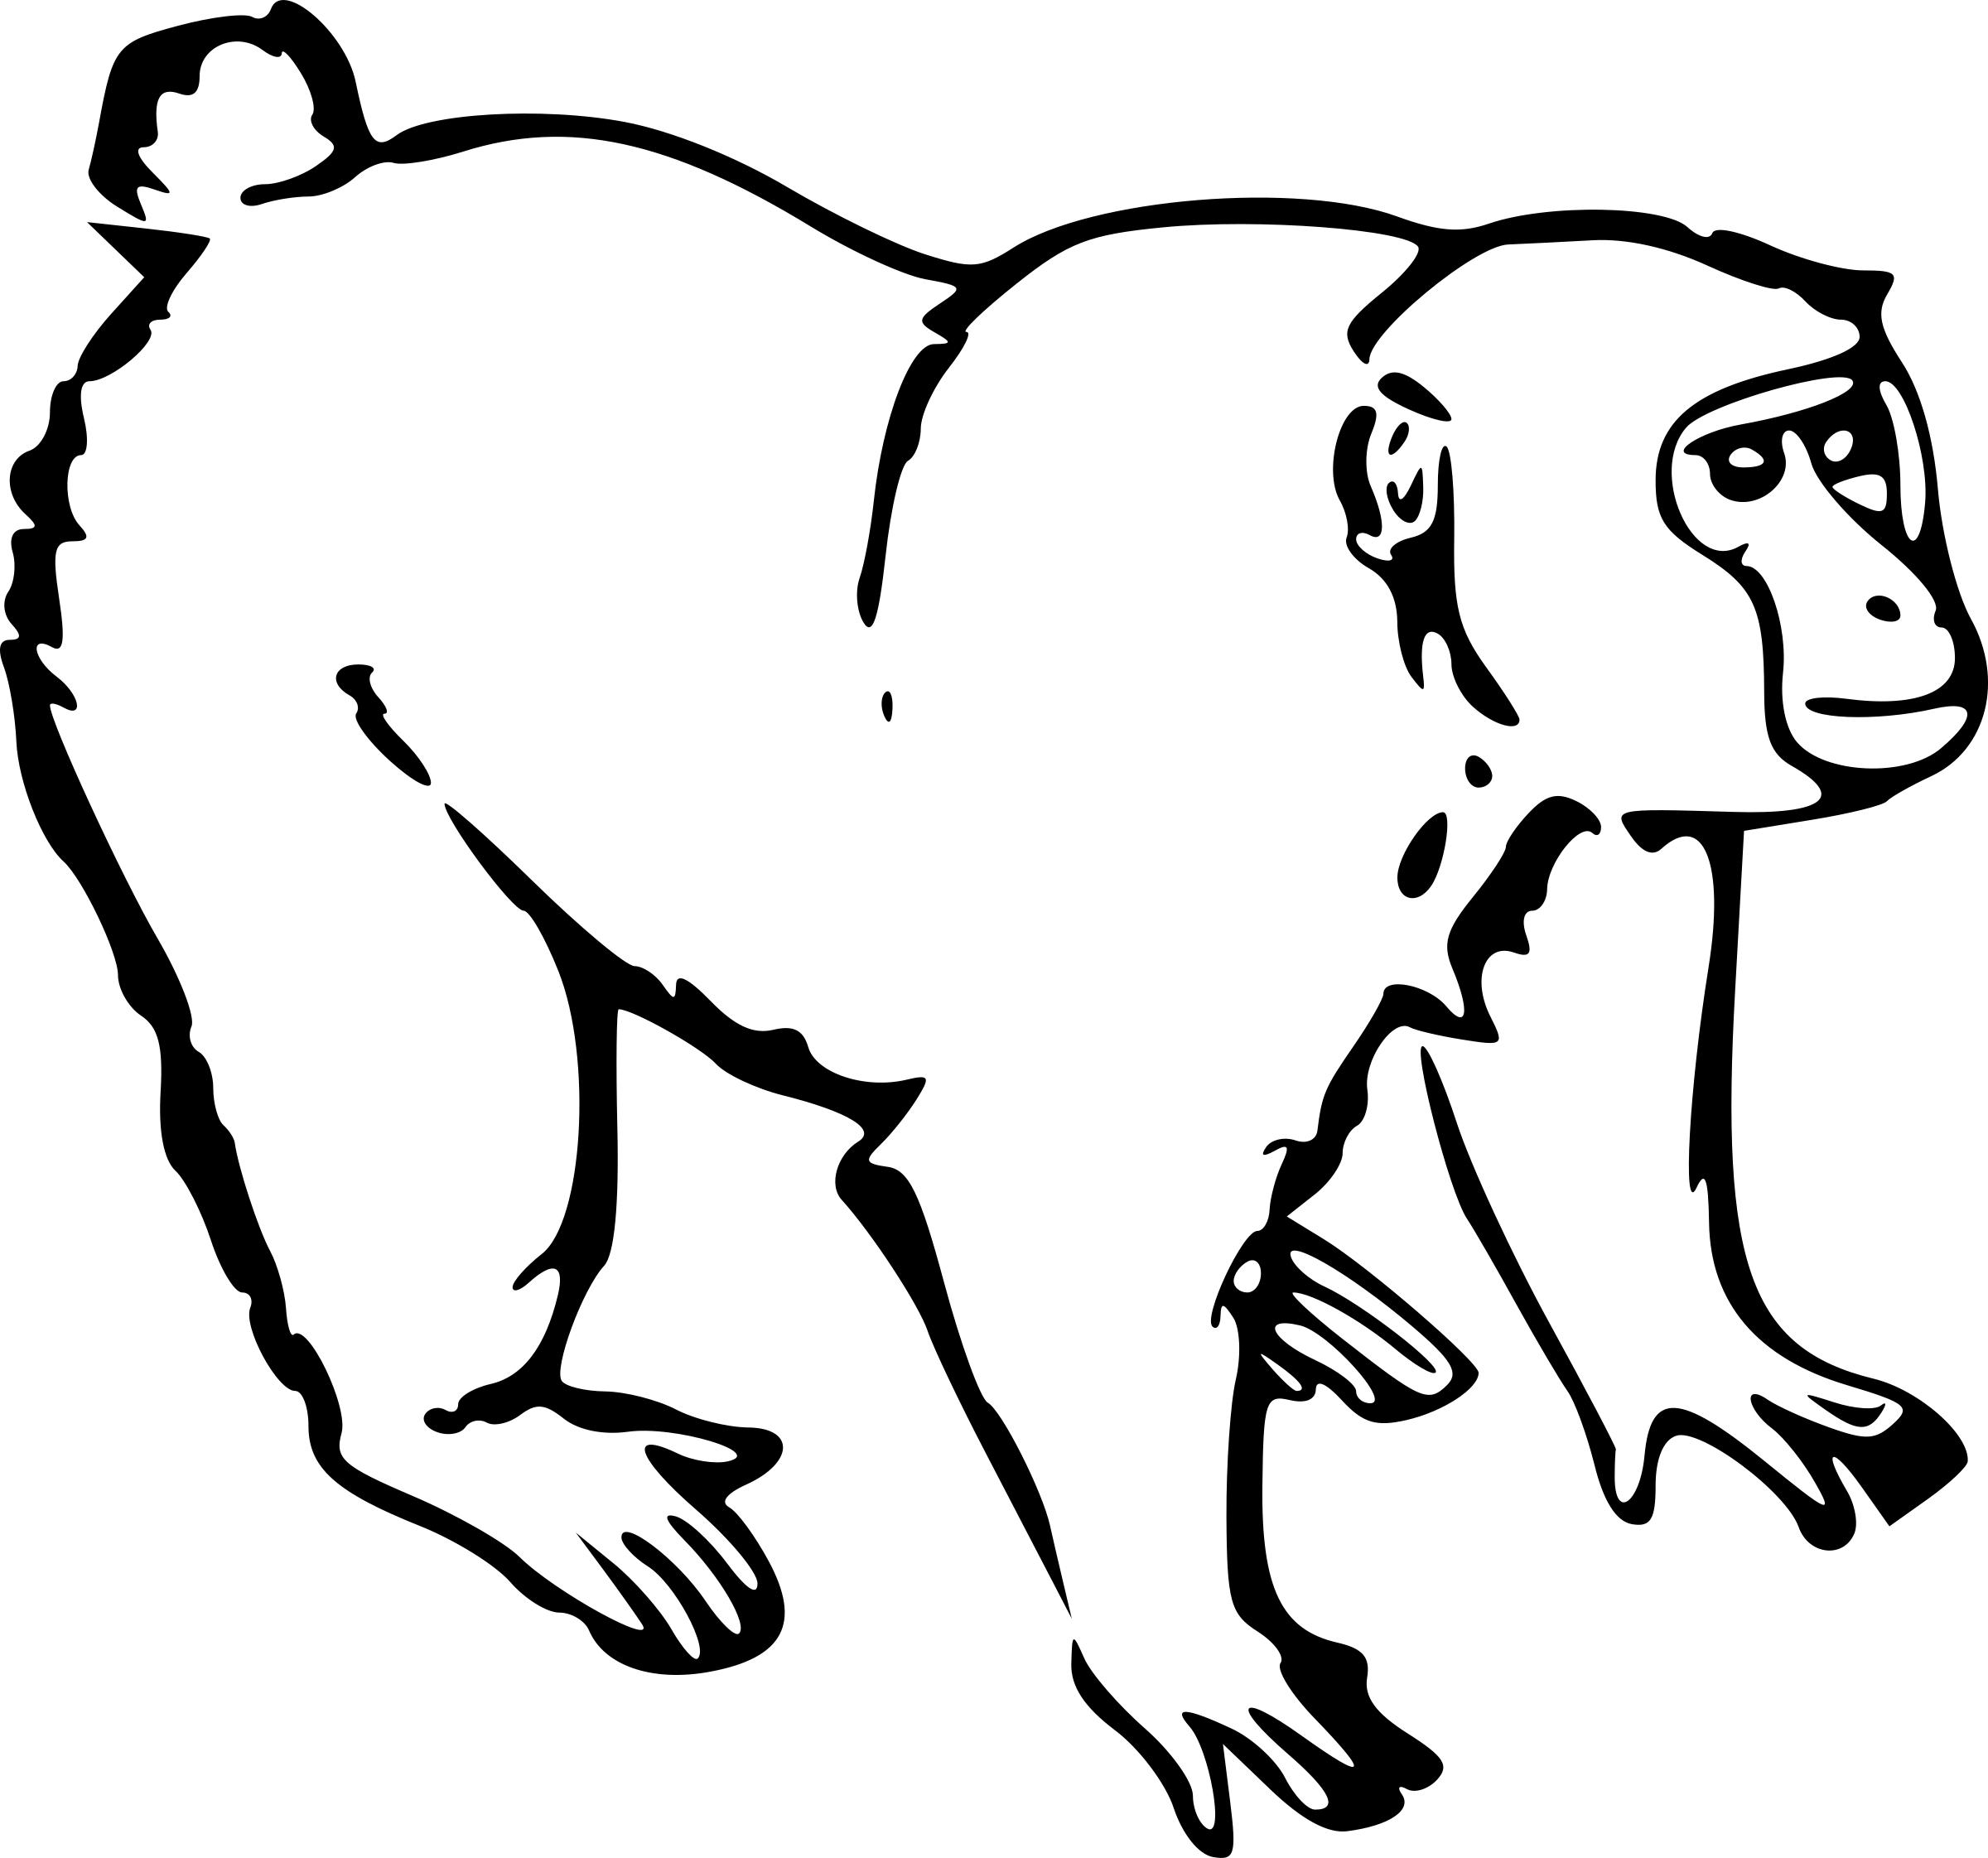 Ape clipart outline. Gorilla icons png free